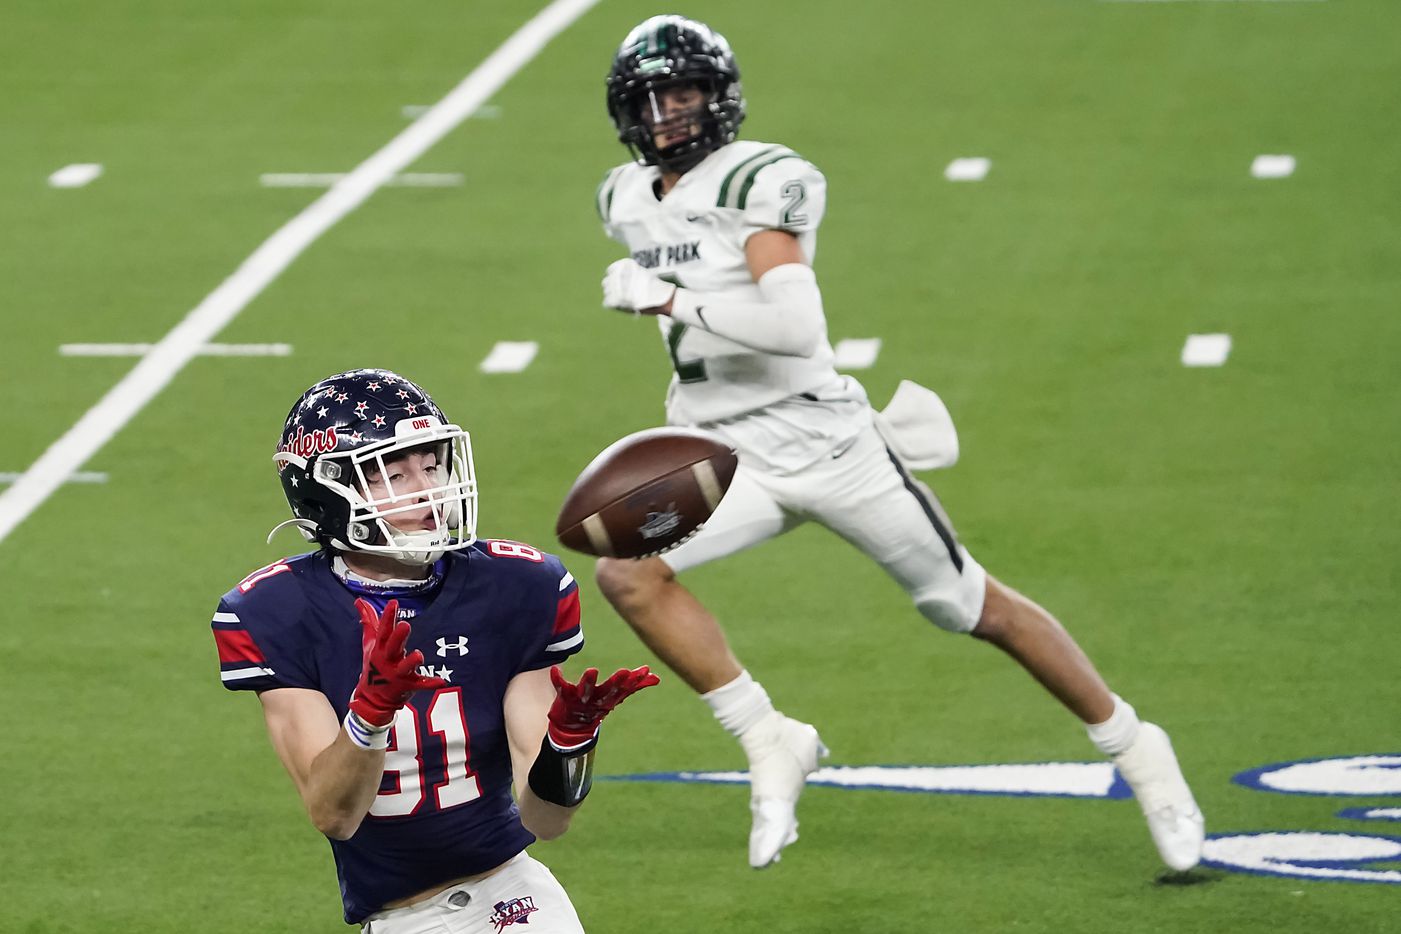 Denton Ryan wide receiver Keagan Cunningham (81) hauls in a 52-yard touchdown pass from quarterback Seth Henigan as Cedar Park defensive back Blake Burton (2) defends during the first half of the Class 5A Division I state football championship game at AT&T Stadium on Friday, Jan. 15, 2021, in Arlington, Texas. (Smiley N. Pool/The Dallas Morning News)